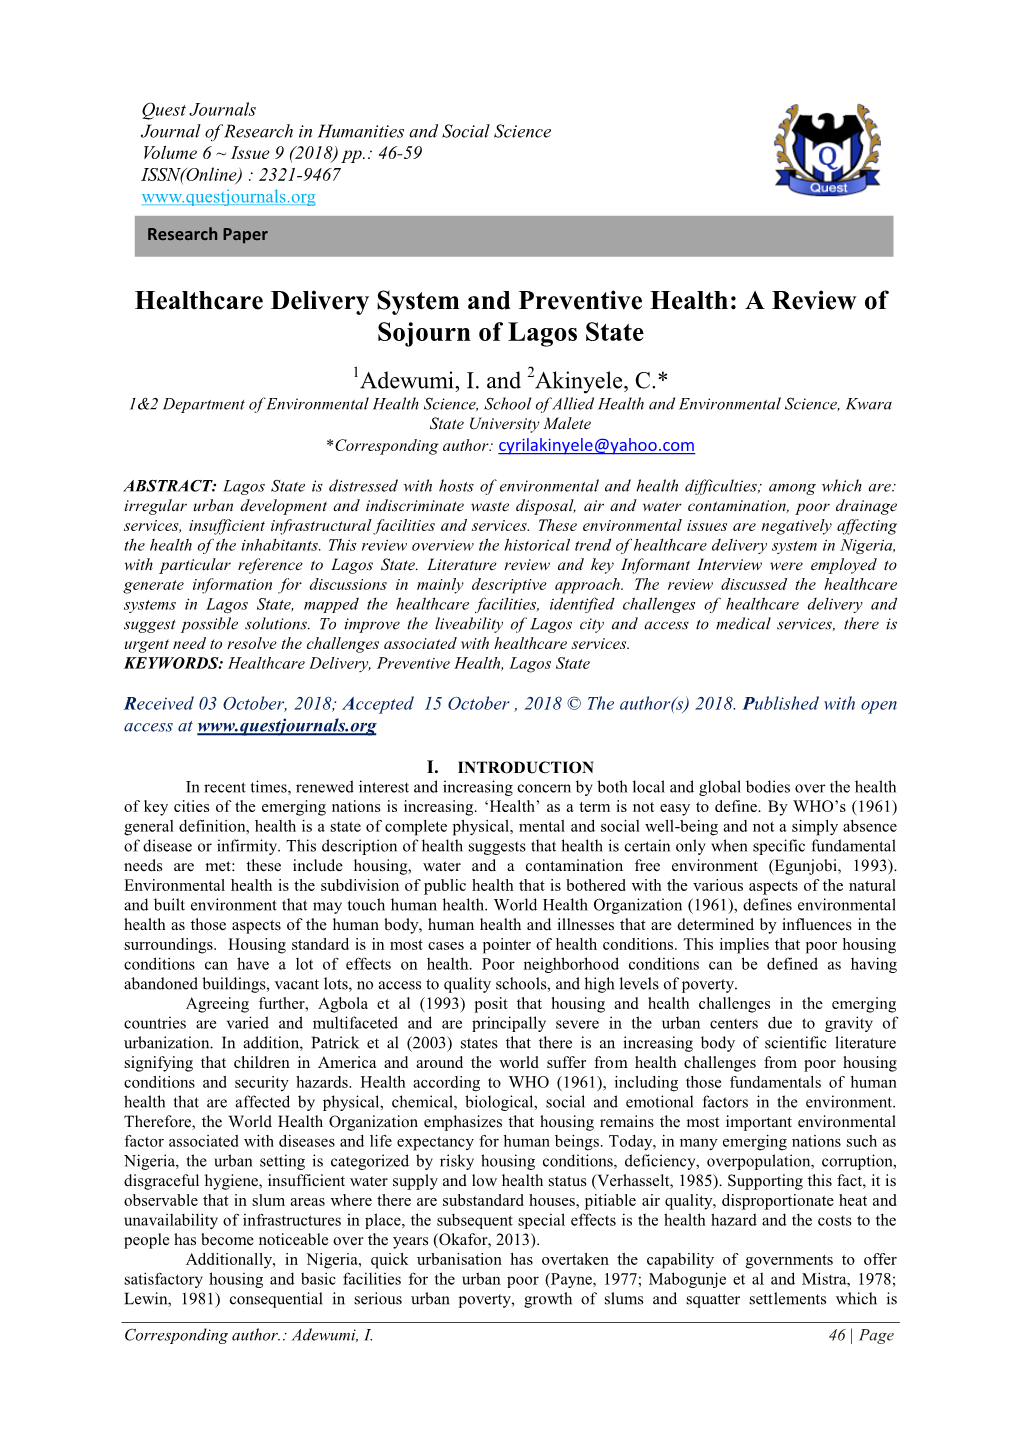 Healthcare Delivery System and Preventive Health: a Review of Sojourn of Lagos State